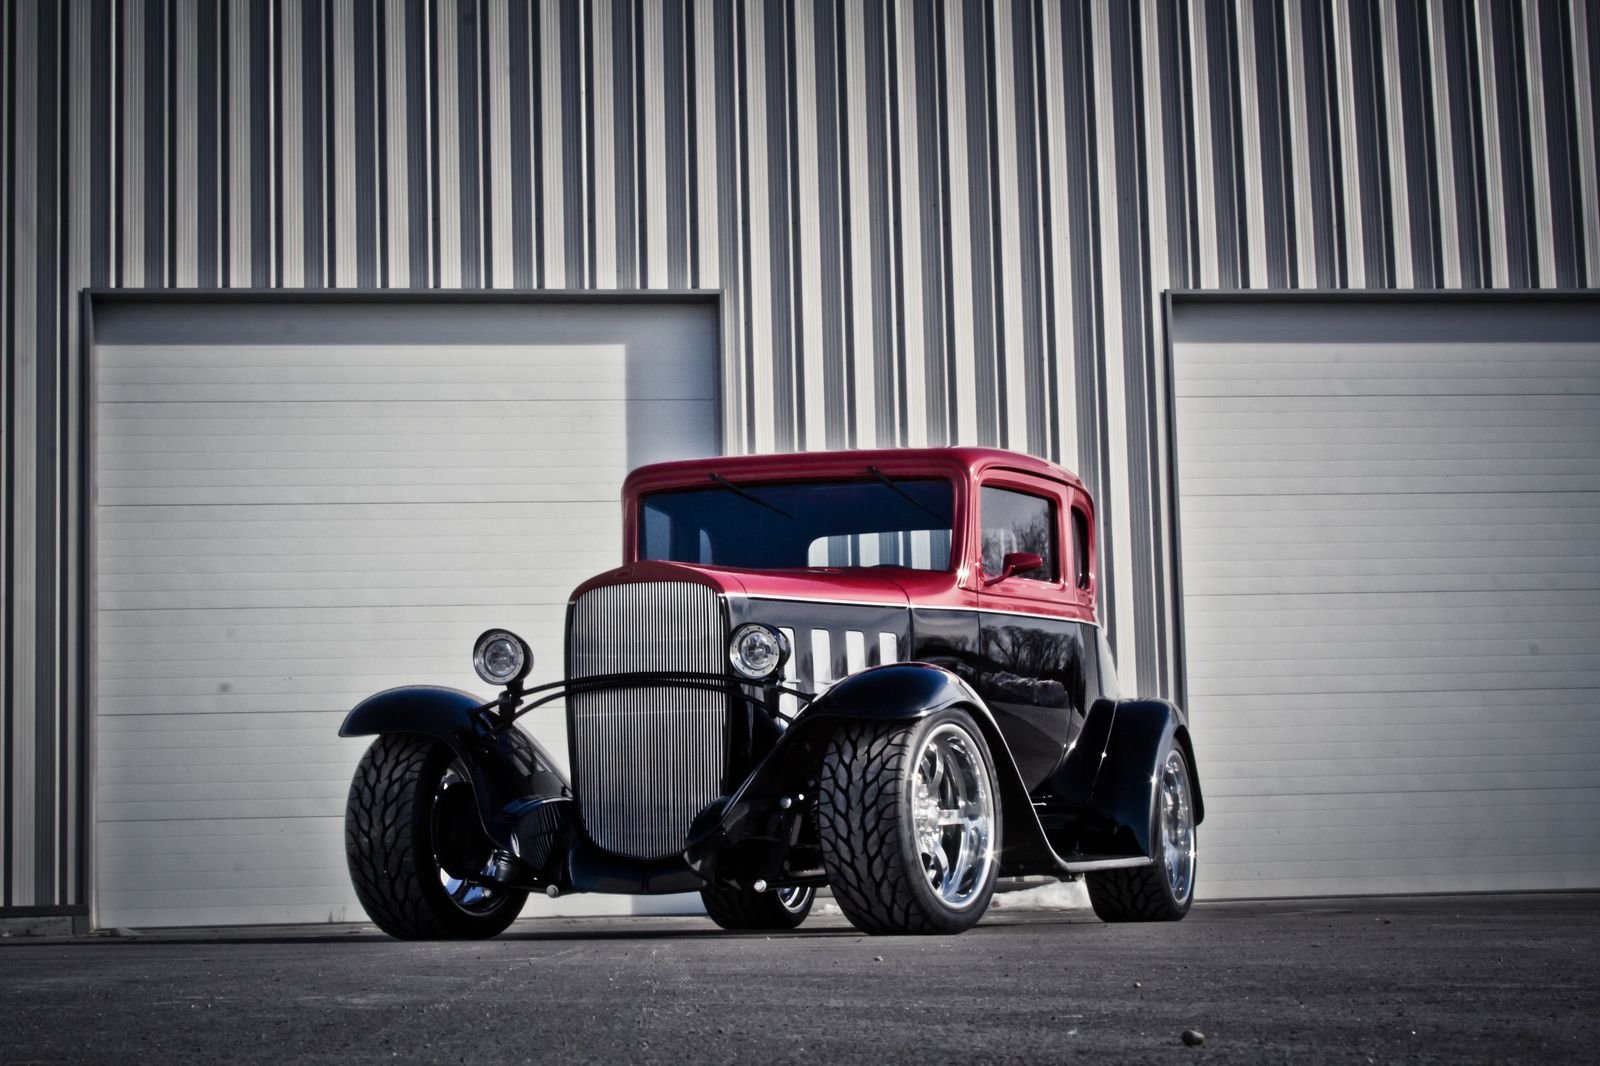 212---1932-chevy-coupe-cleanup_26426061175_o.jpg